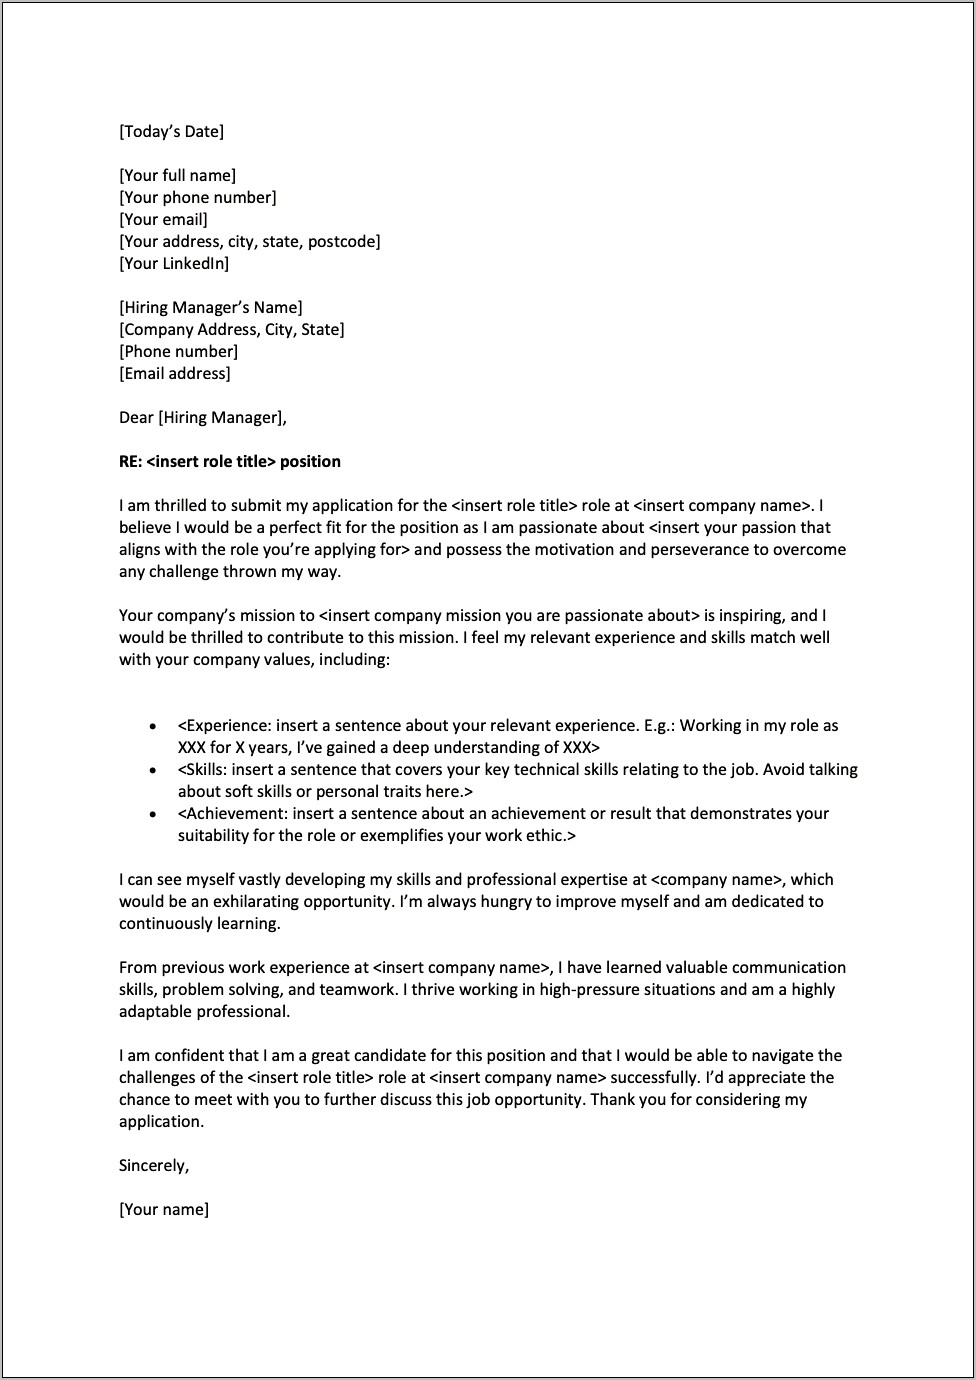 Resume Cover Letter Cover Letter Examples